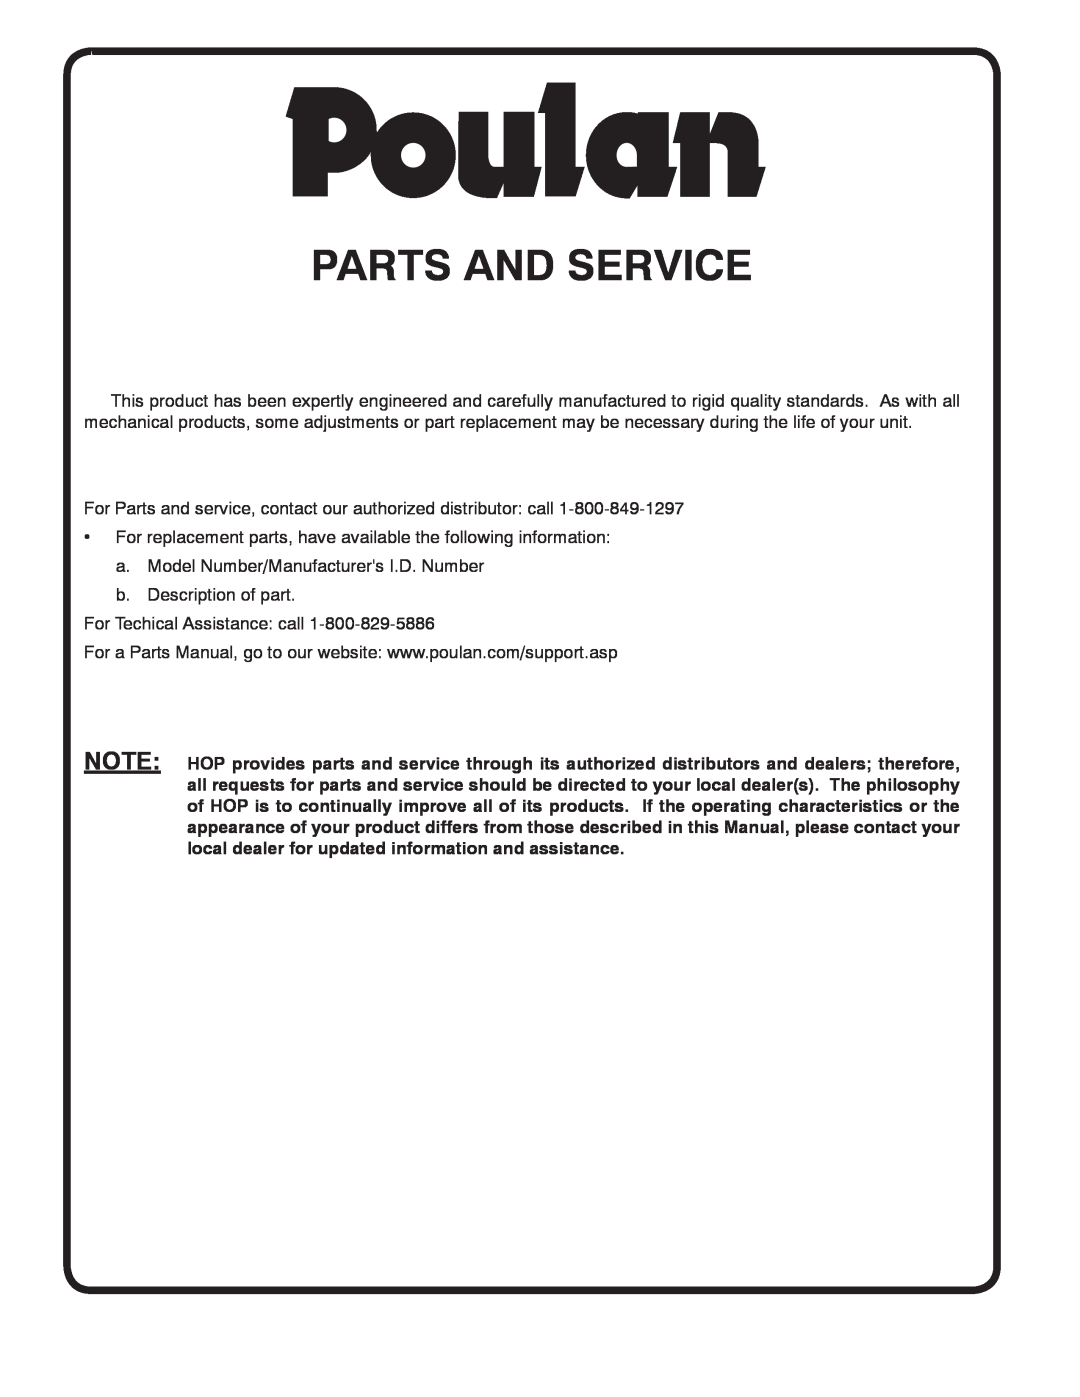 Poulan 425179 manual Parts And Service 